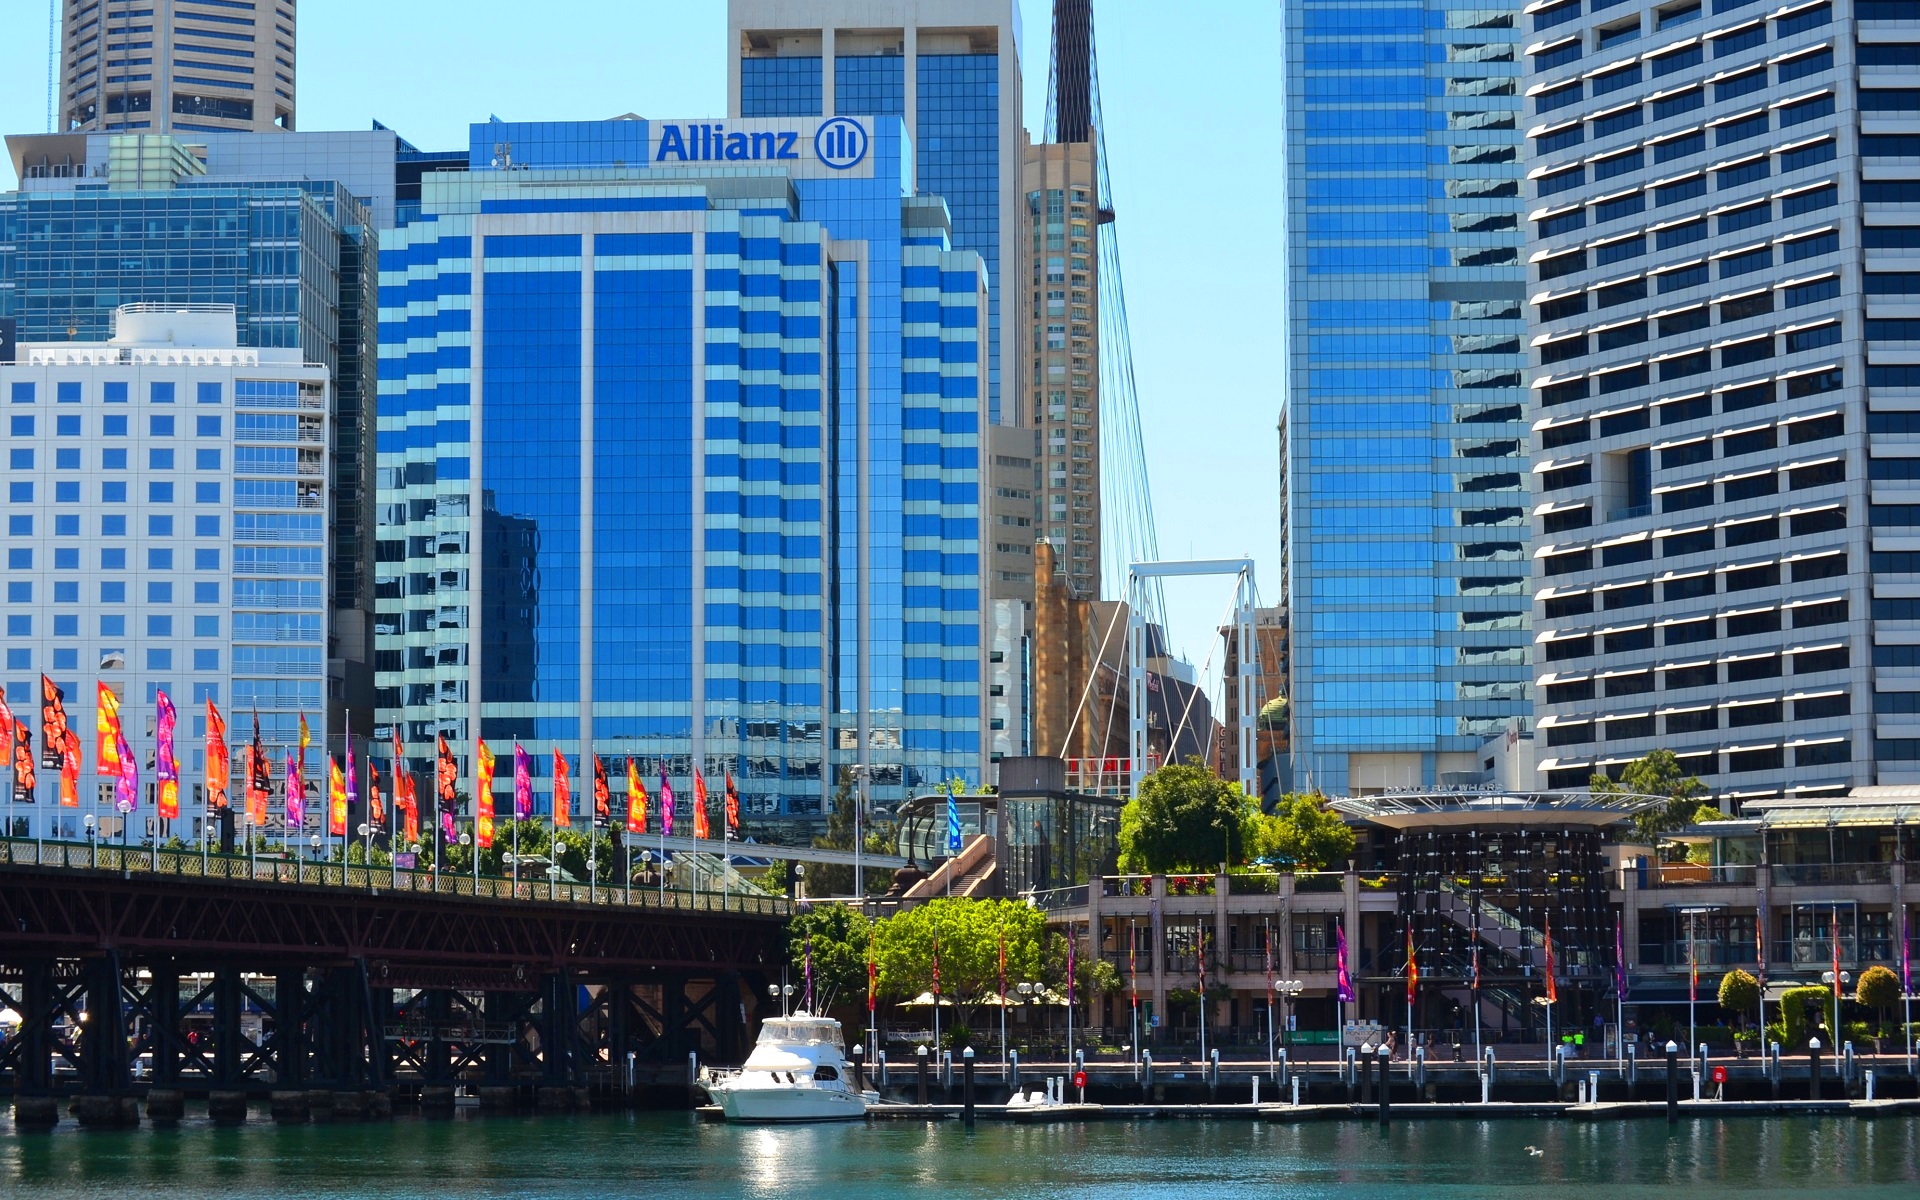 man made, darling harbour, australia, boat, building, city, cockle bay, sydney, wharf